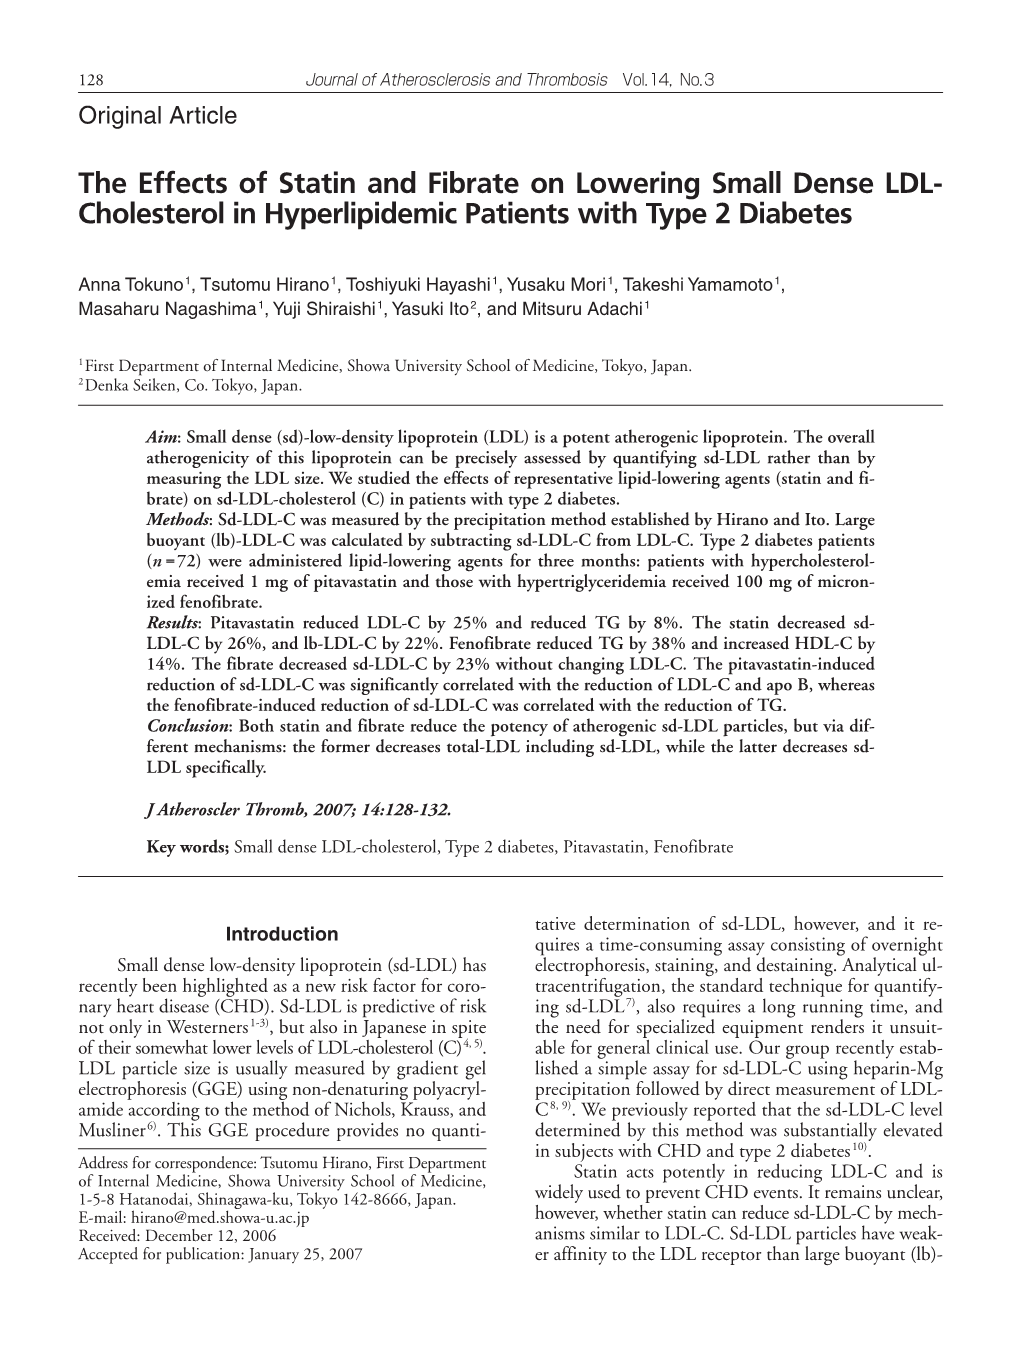 The Effects of Statin and Fibrate on Lowering Small Dense LDL- Cholesterol in Hyperlipidemic Patients with Type 2 Diabetes